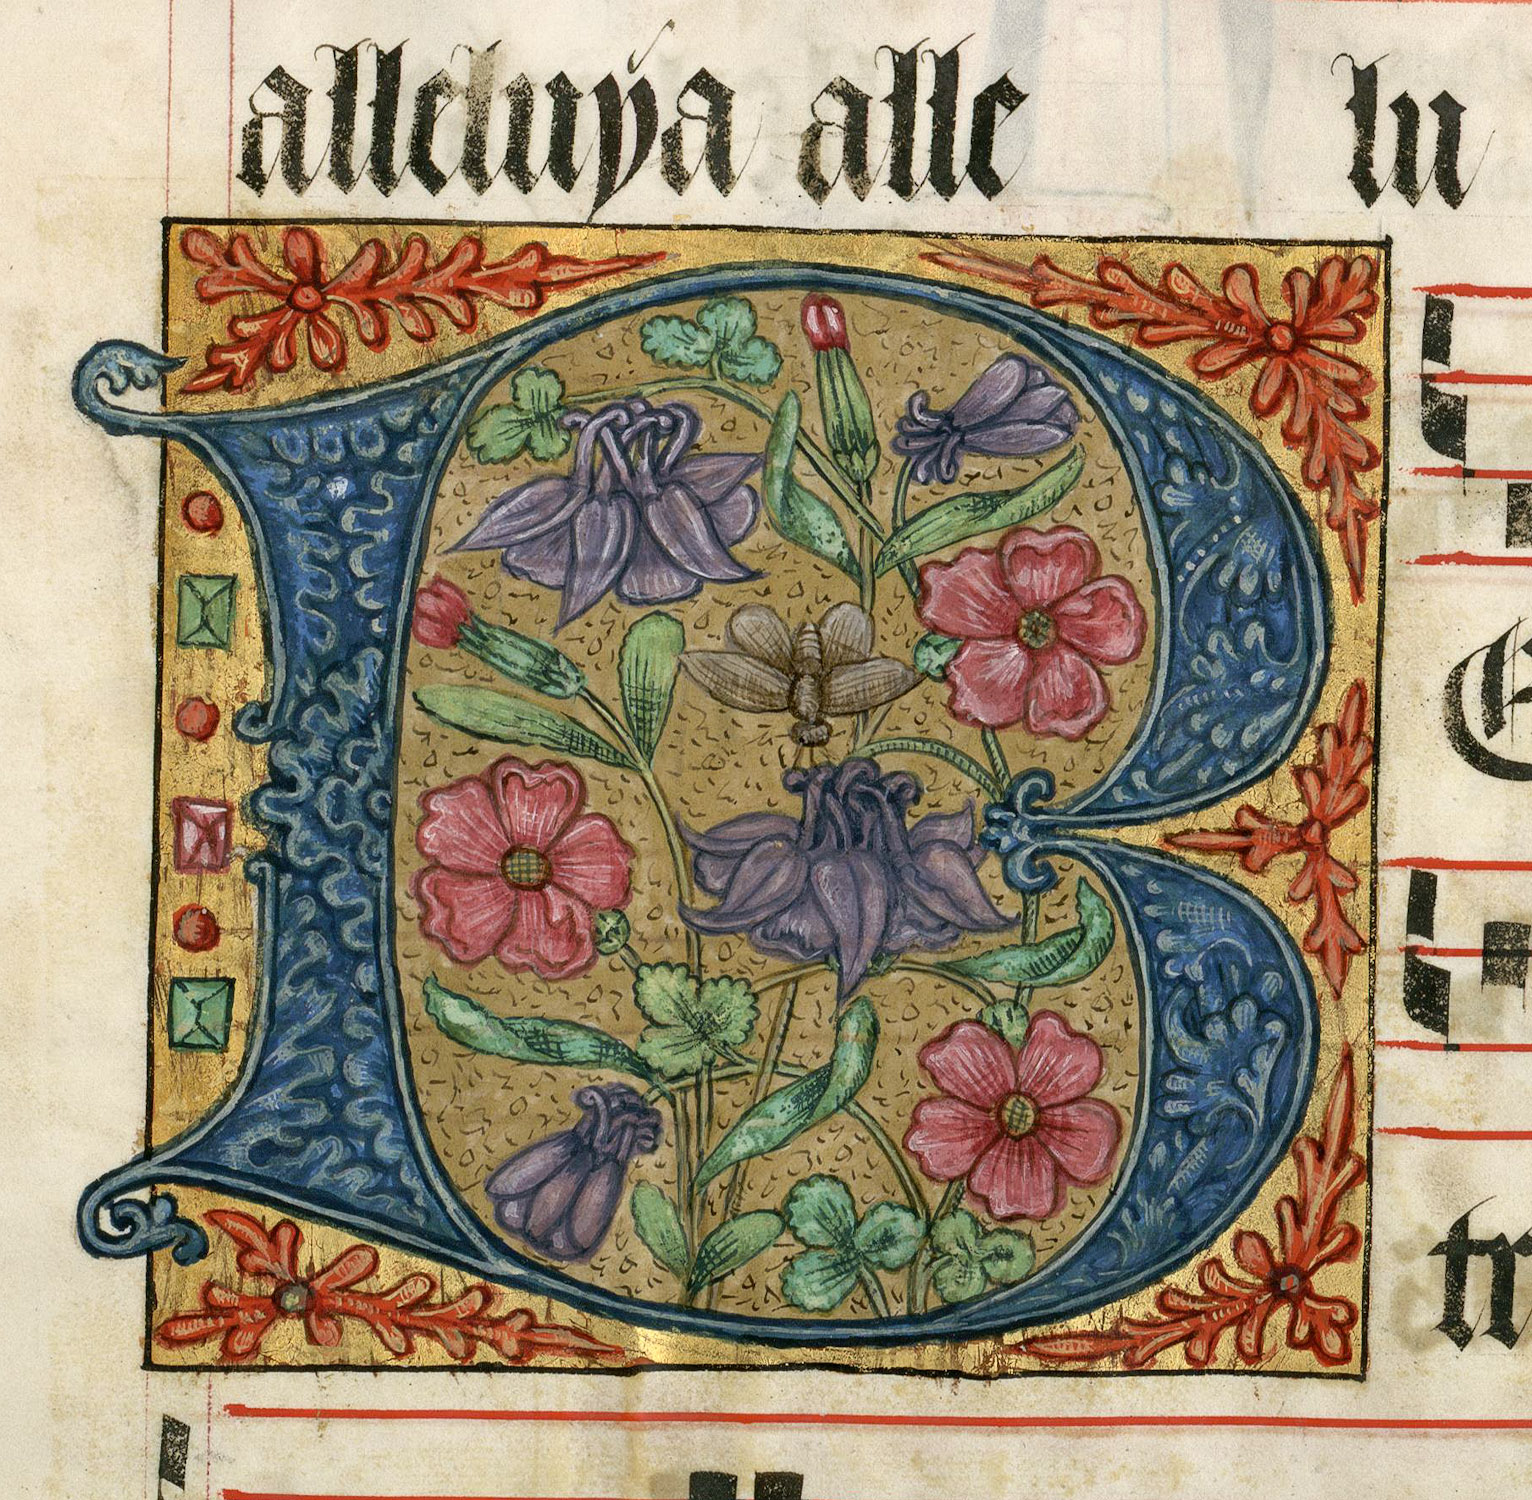 a medieval style book with a decorative flower design